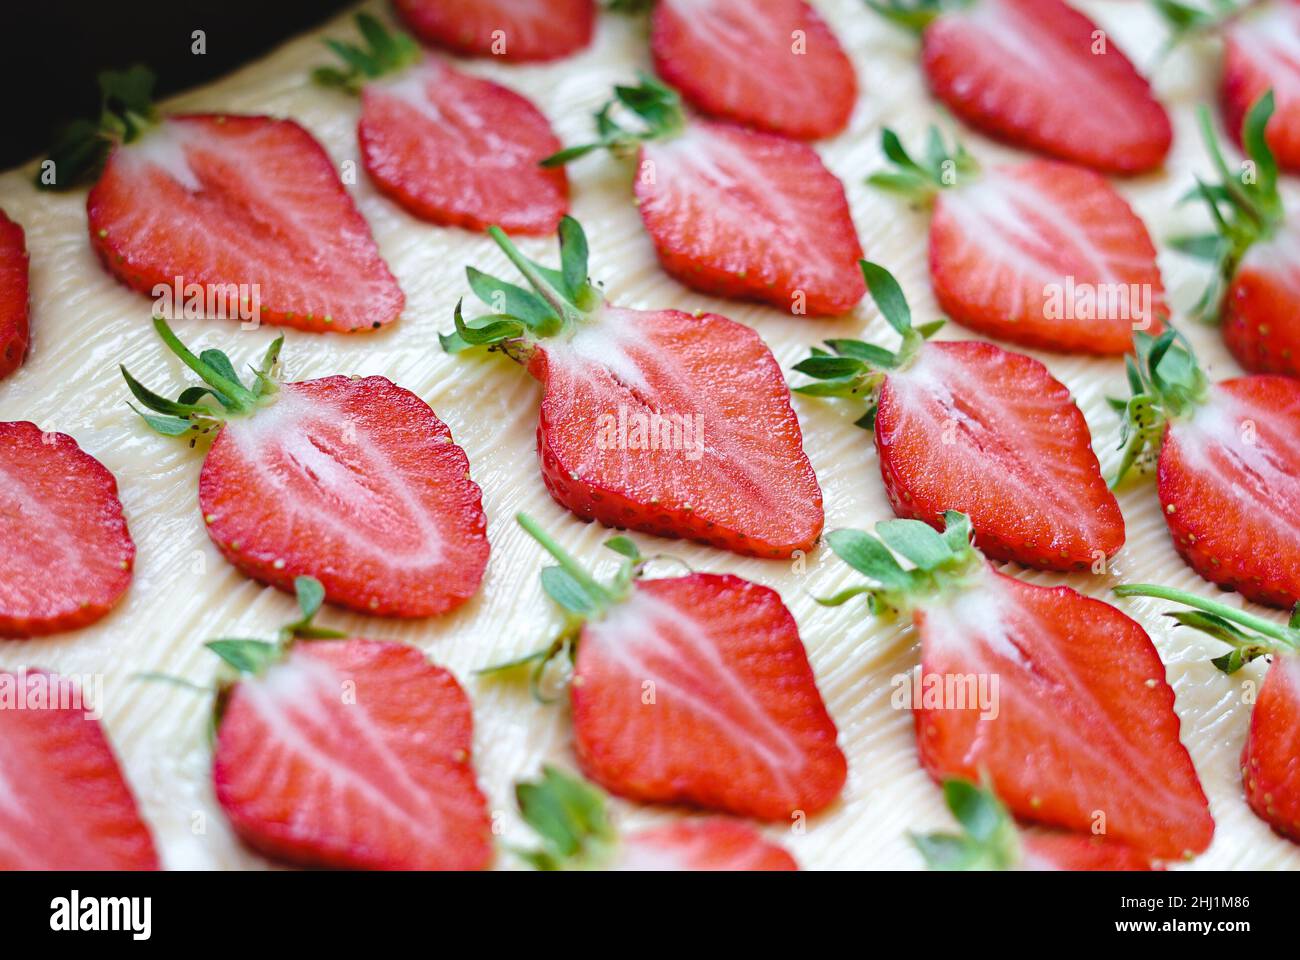 Many sliced strawberries on a light background Stock Photo